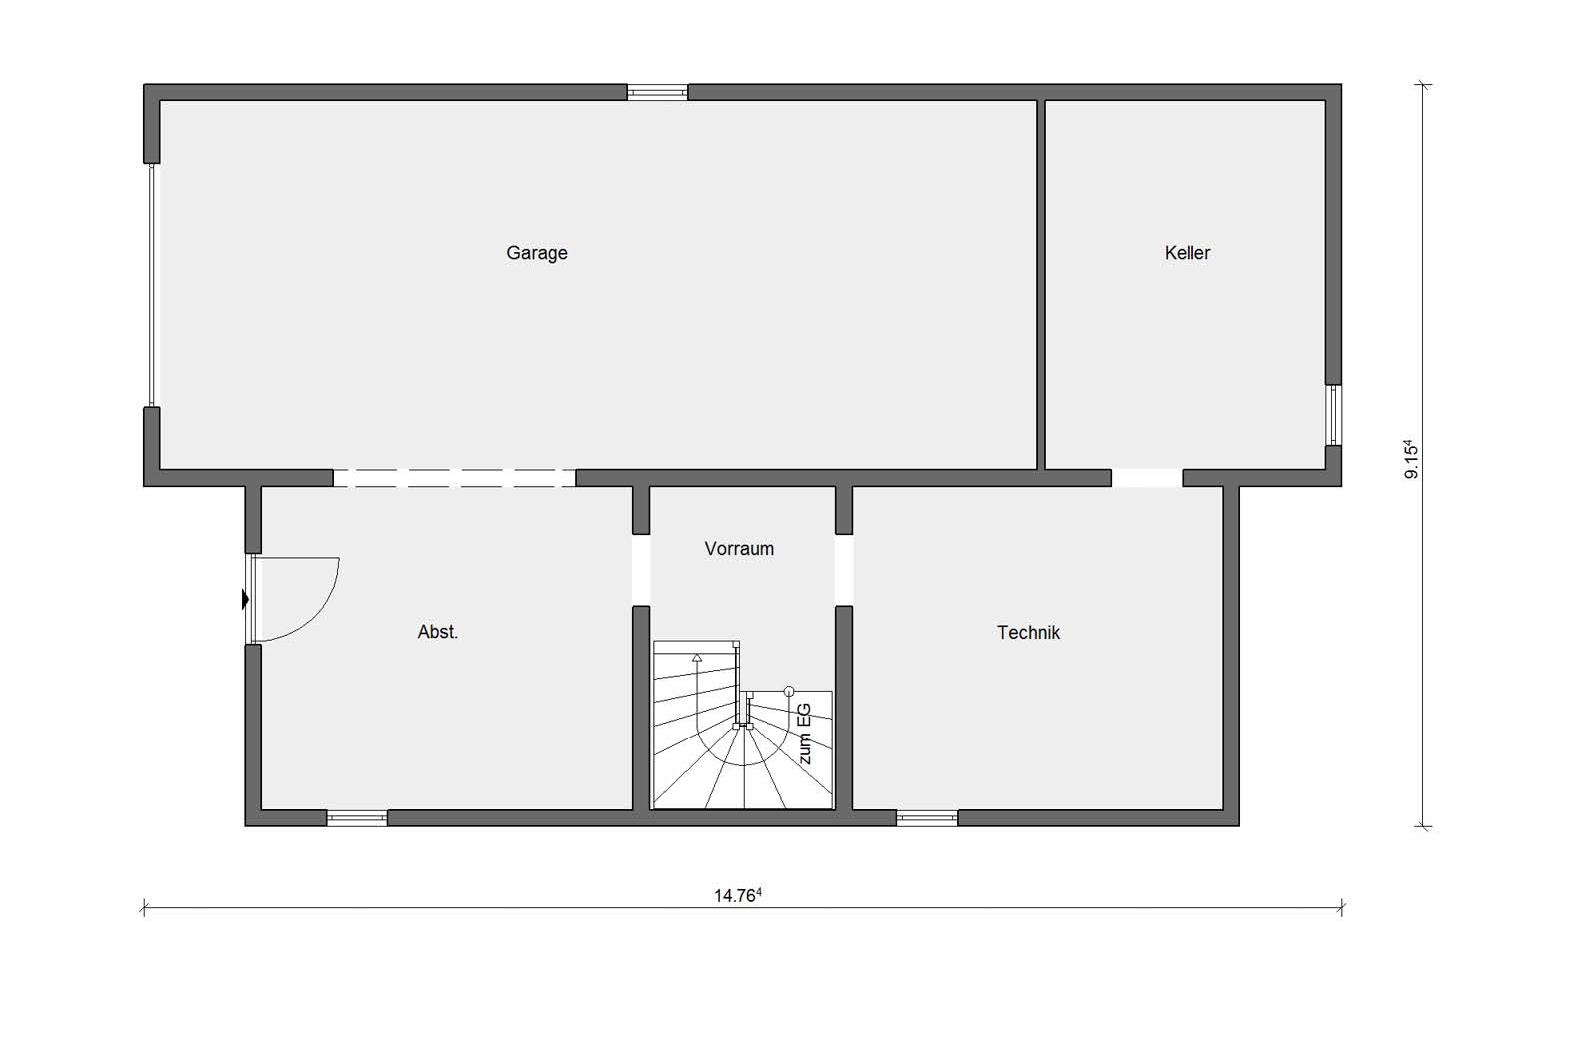 Floor plan basement E 15-217.1 prefabricated house with 200sqm